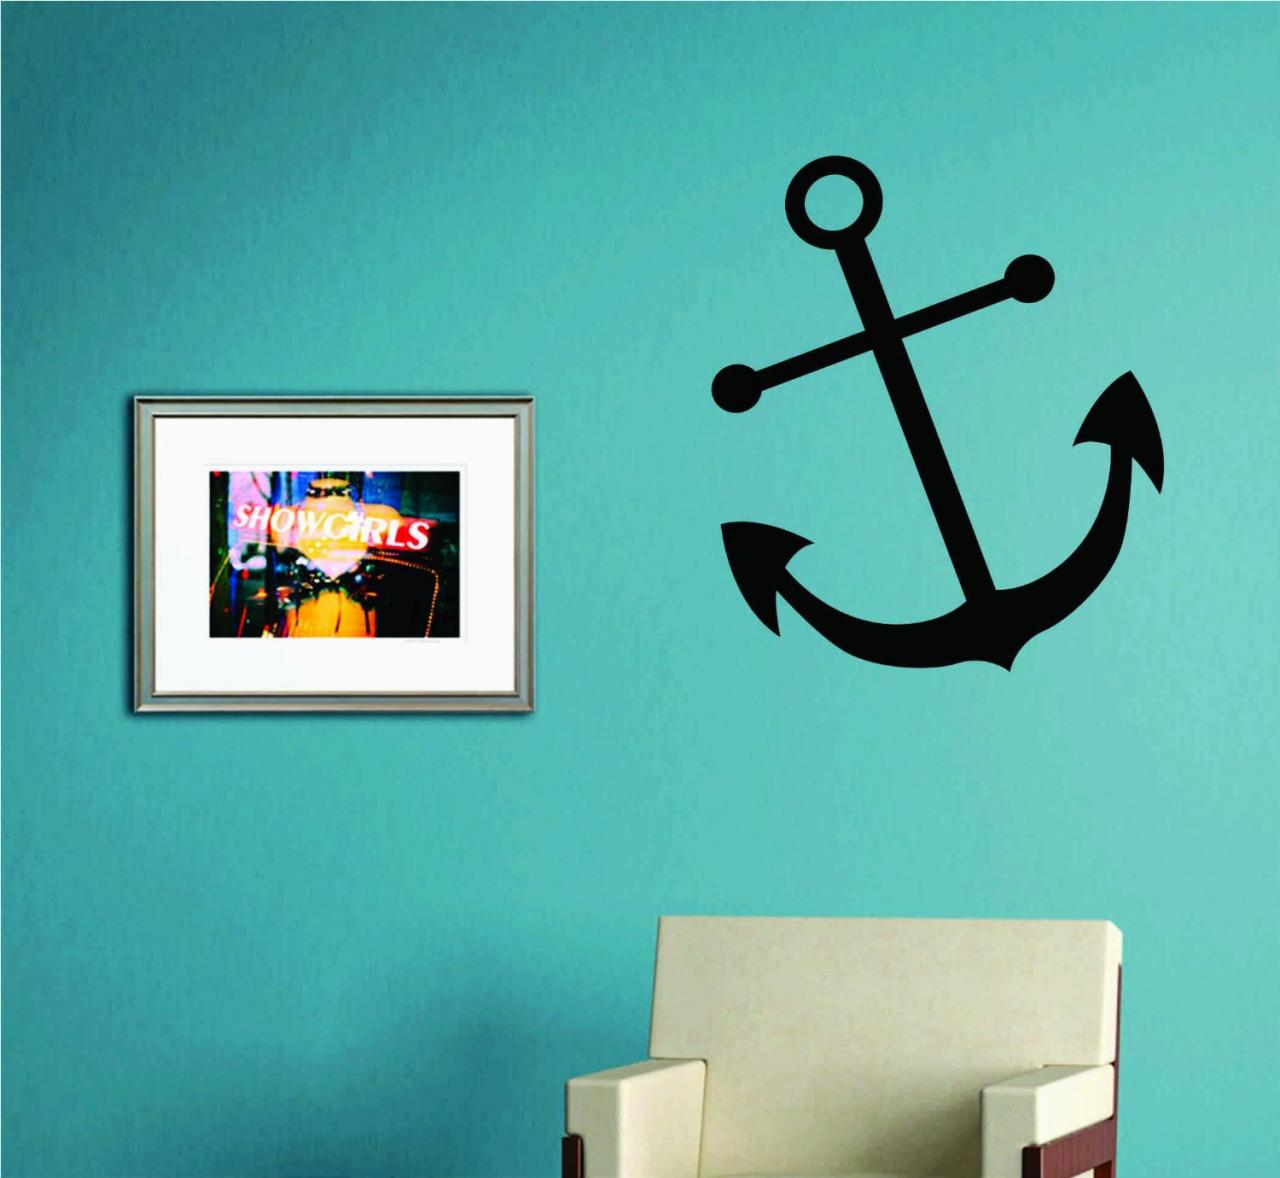 Anchor Version 103 Wall Decal Sticker Family Art Graphic Home Decor Mural Decal Sticker Famous Quotes Wall Mural